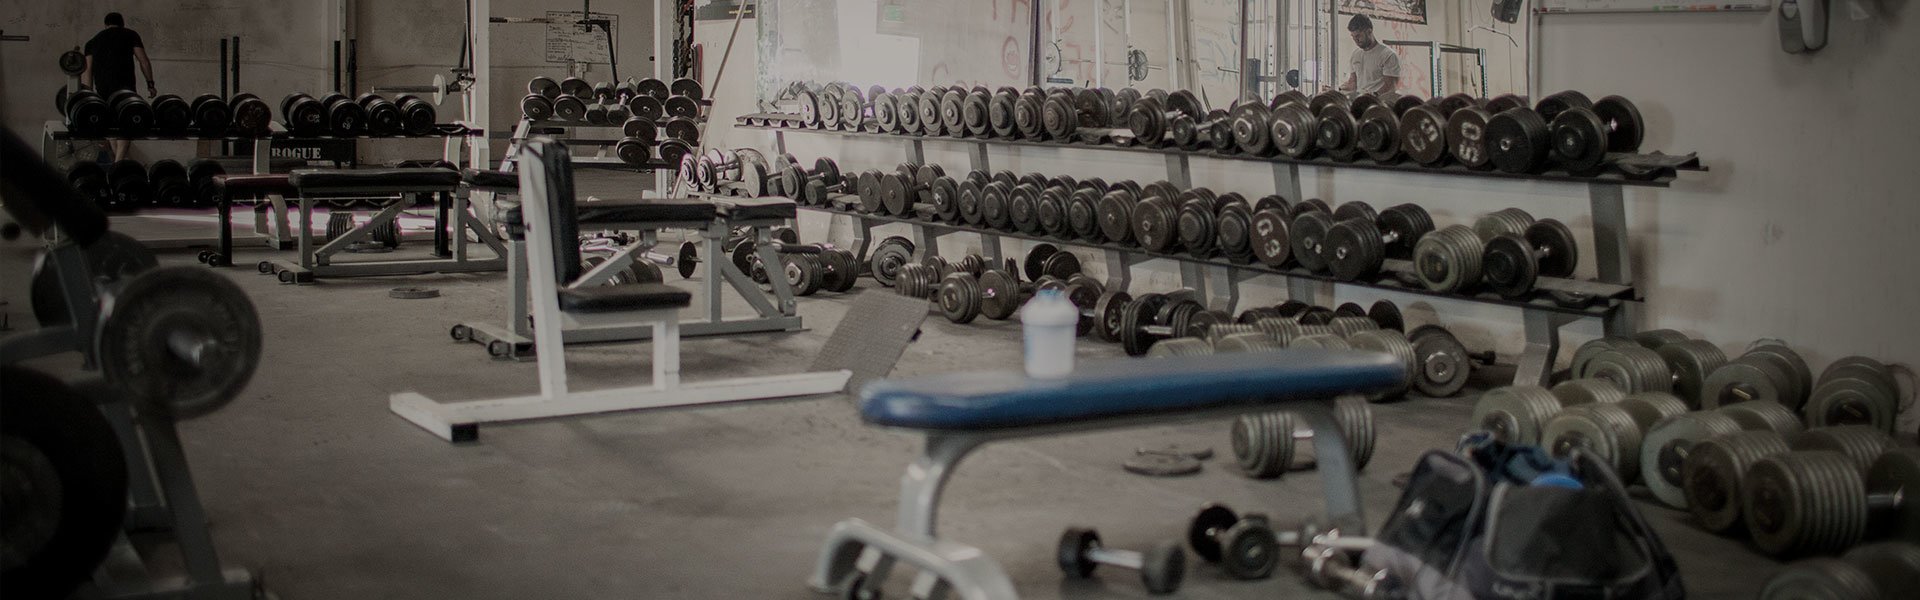 Home Gym Equipment Reviews: Our Expert's Take On The Top 5 Home Gyms!